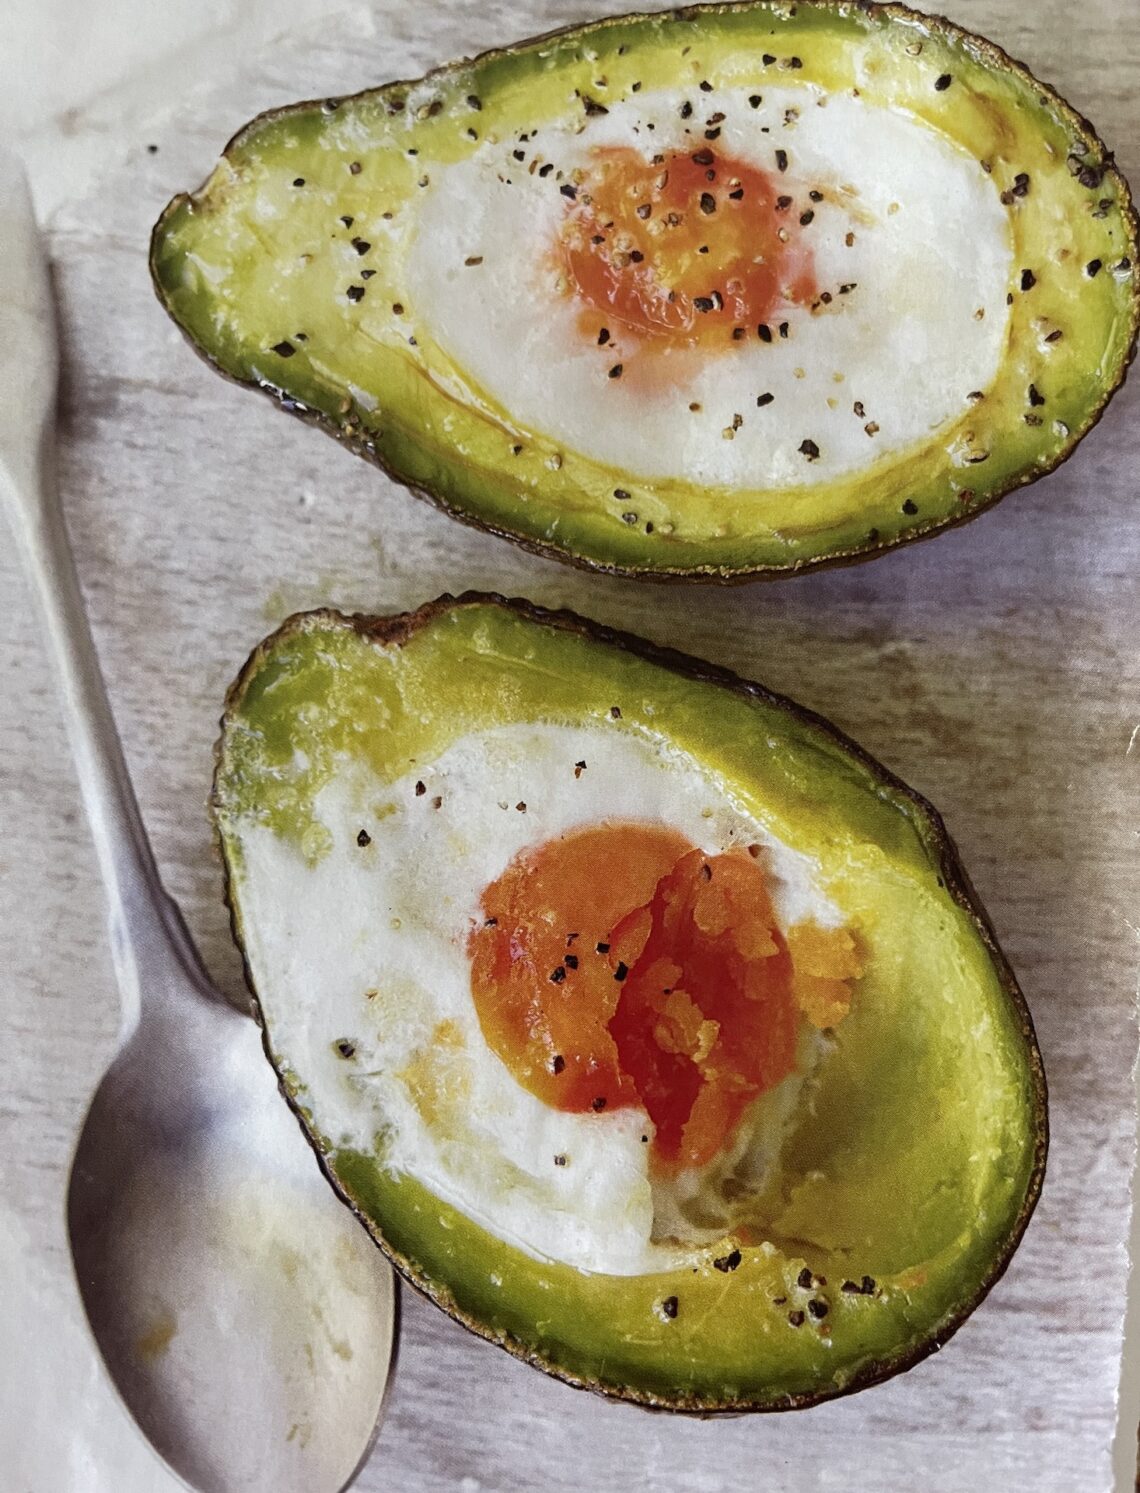 Avocado and baked eggs